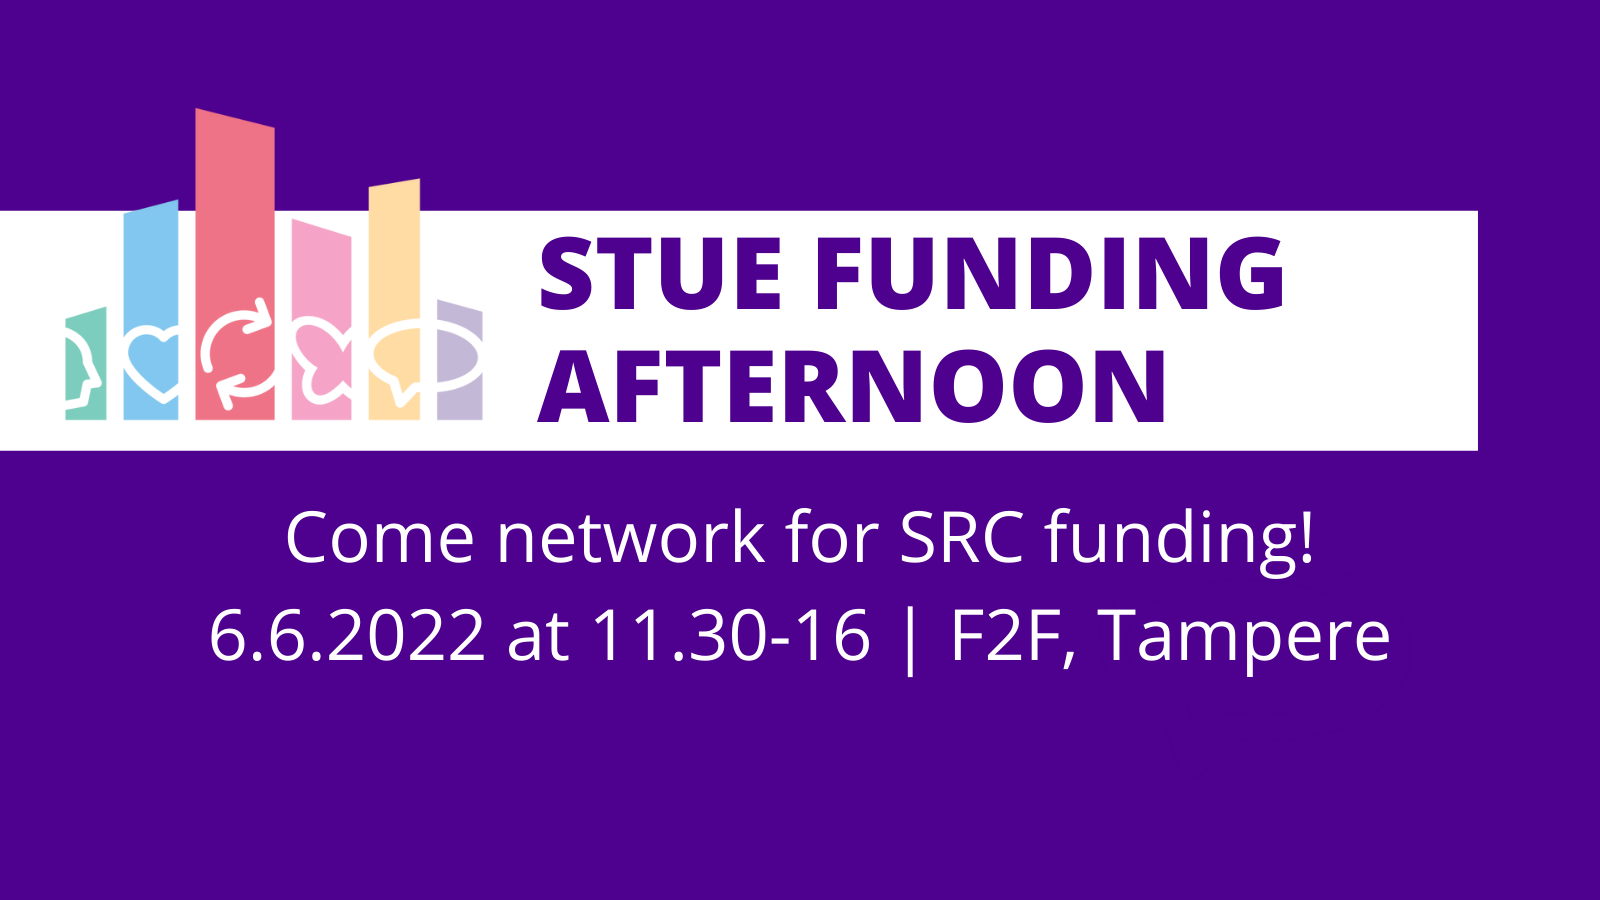 Welcome to STUE funding afternoon!